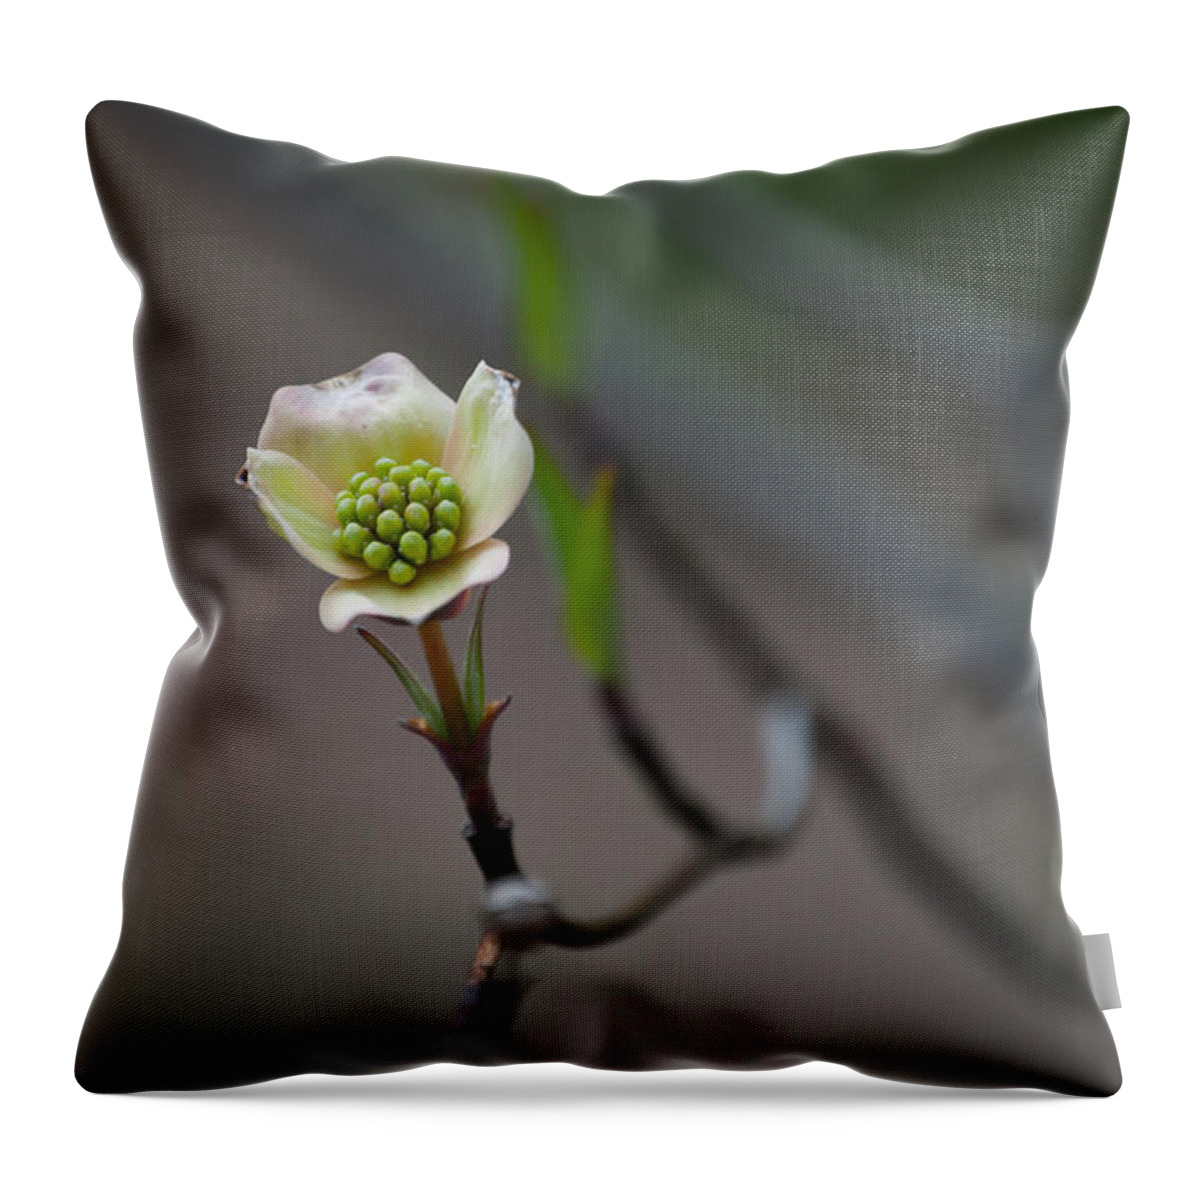 Plant Throw Pillow featuring the photograph Little Sprout by Trish Tritz